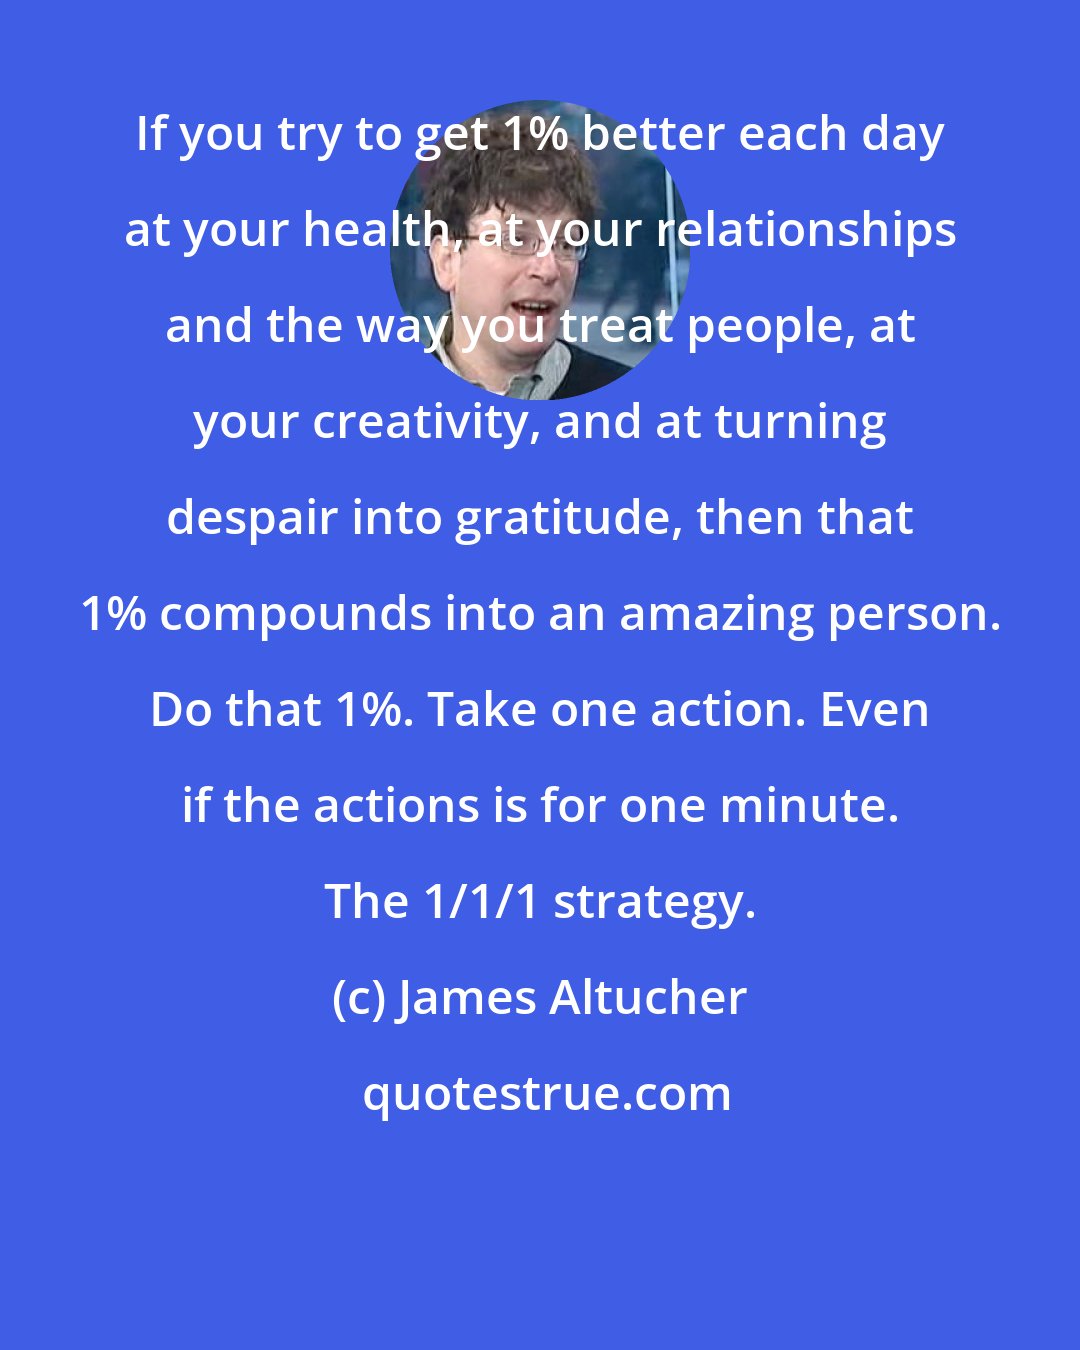 James Altucher: If you try to get 1% better each day at your health, at your relationships and the way you treat people, at your creativity, and at turning despair into gratitude, then that 1% compounds into an amazing person. Do that 1%. Take one action. Even if the actions is for one minute. The 1/1/1 strategy.